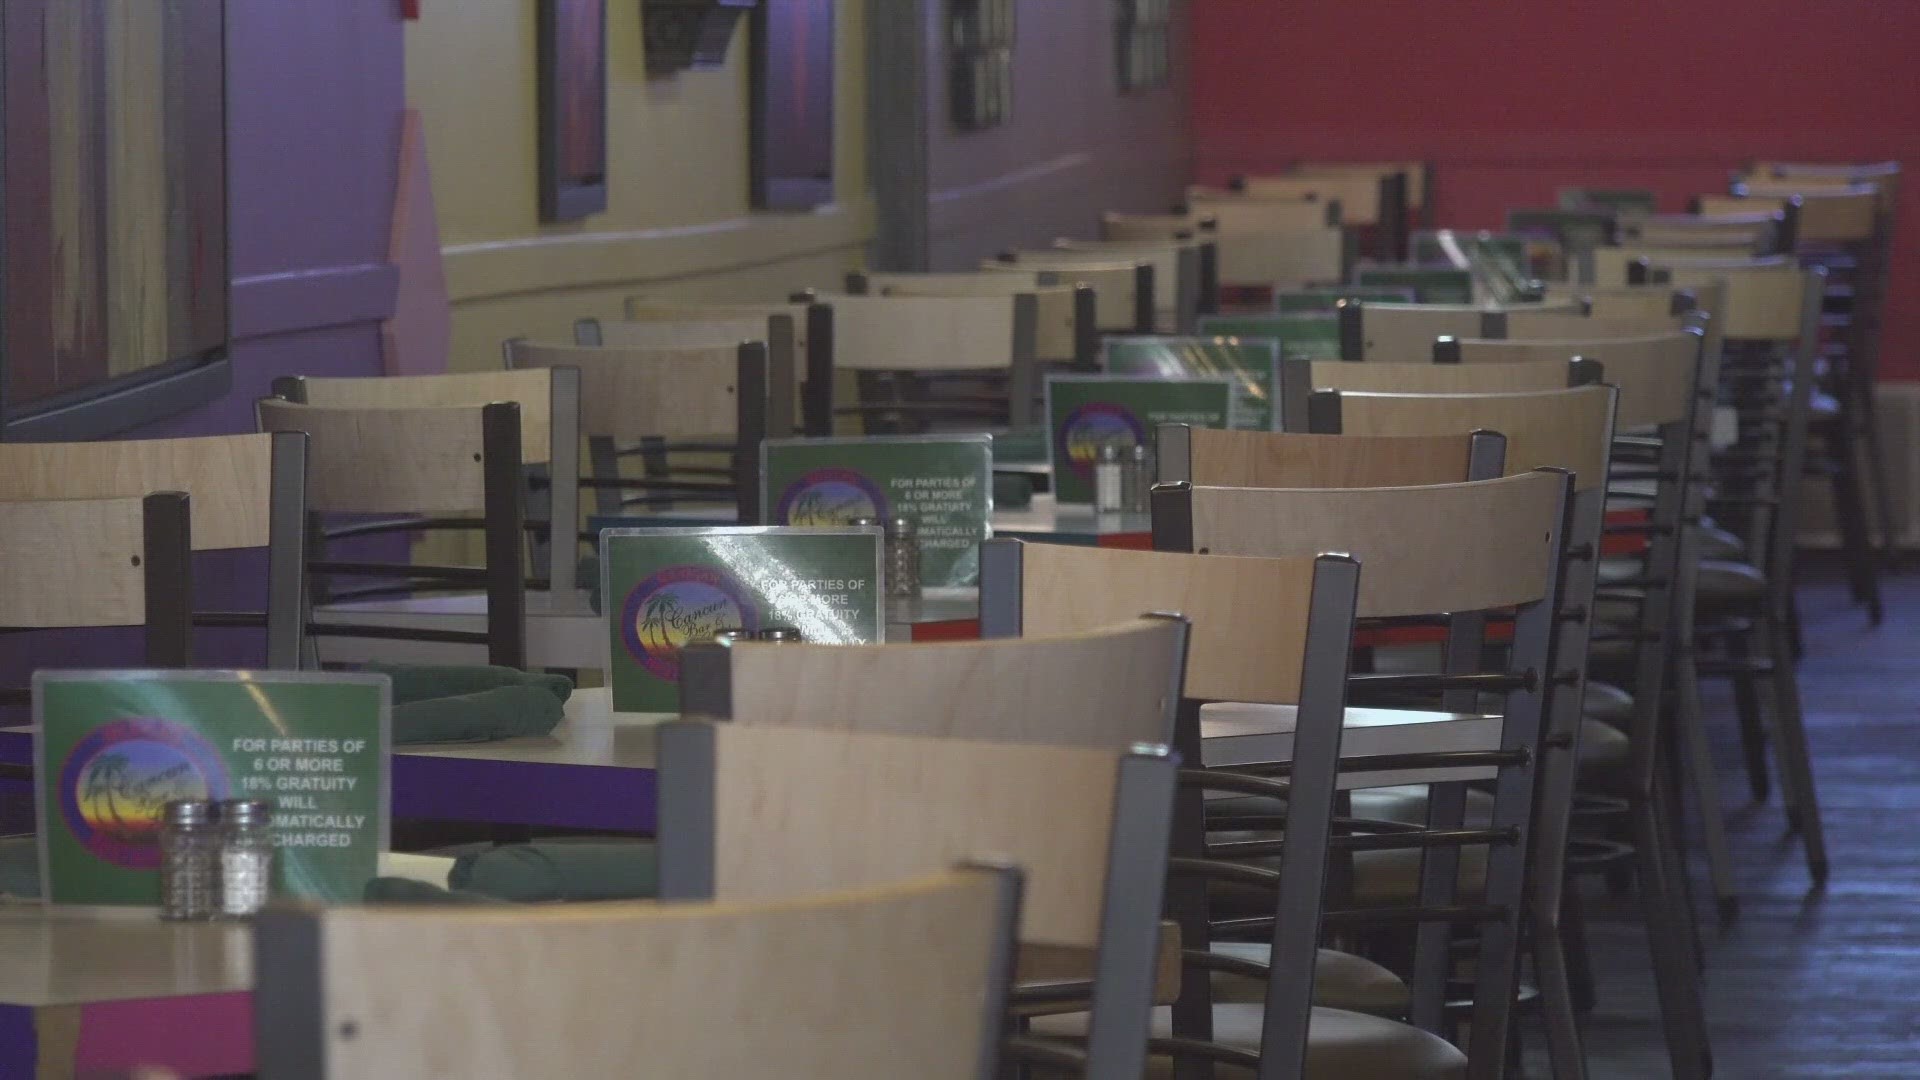 The grill has been one of the more popular spots to eat in Downtown Midland.